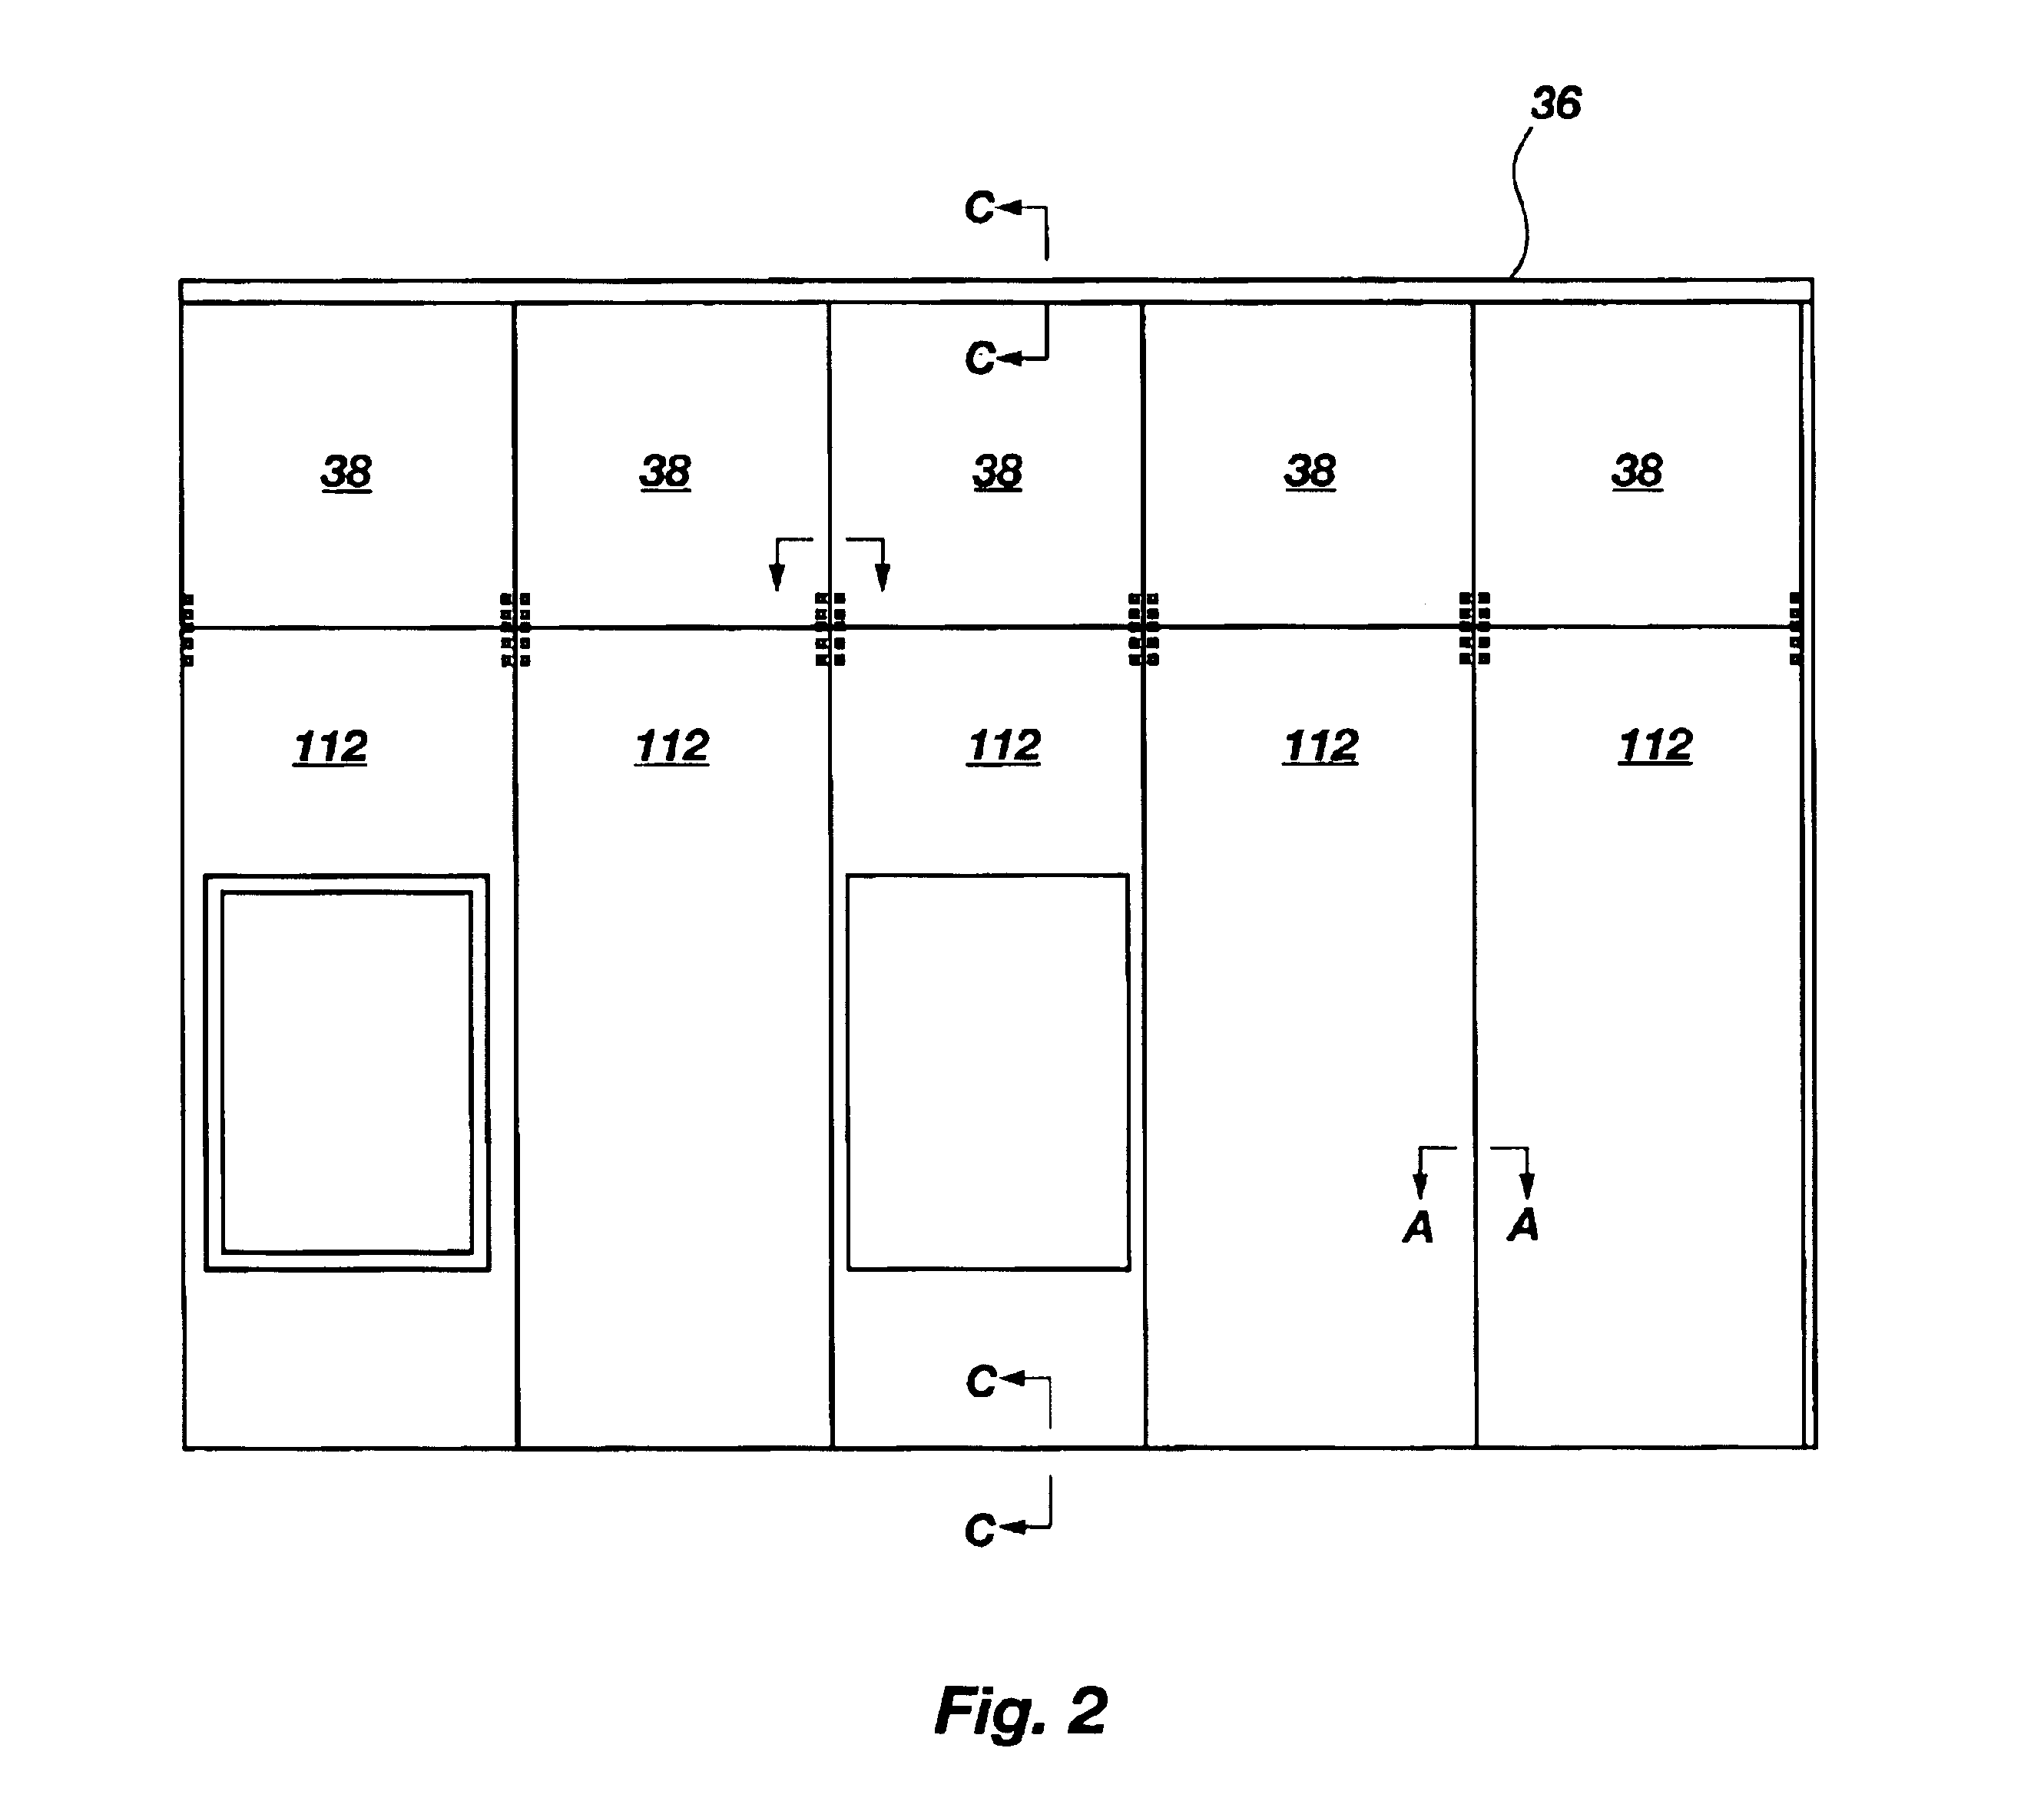 Wall panel assembly and method of assembly